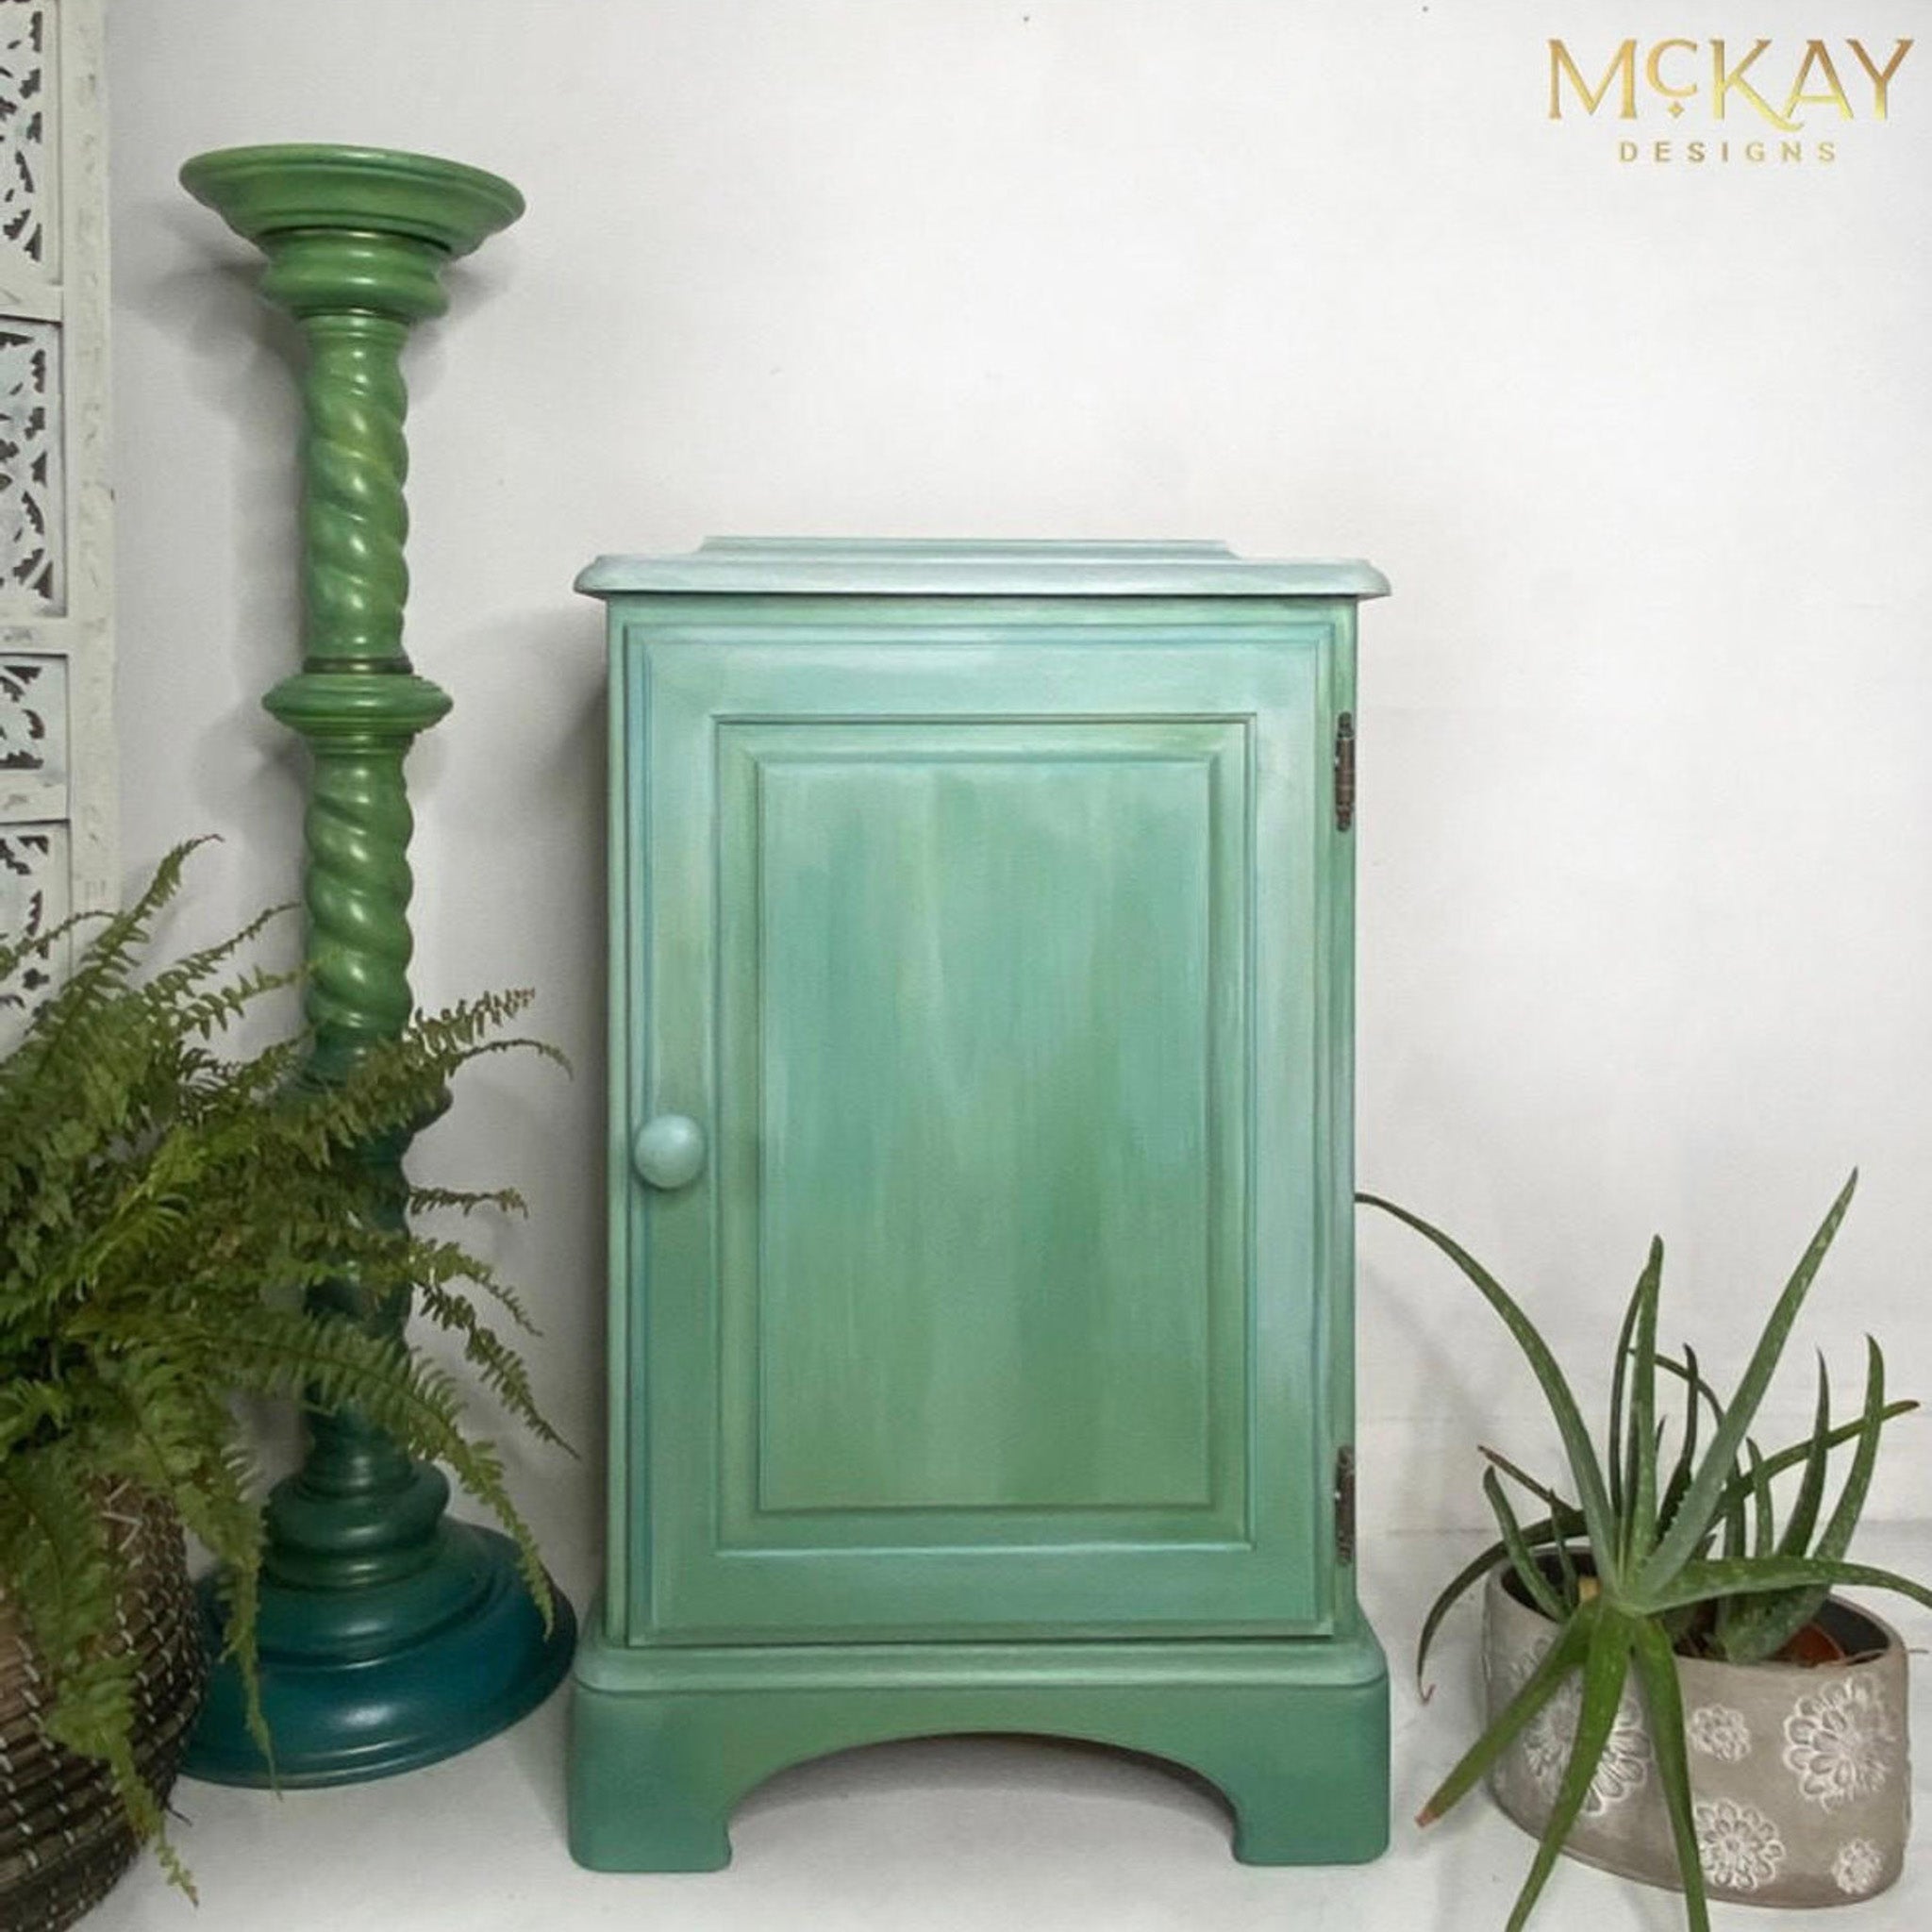 A vintage night stand with a store door refurbished by McKay Designs is painted light green and features Dixie Belle Paint's Whitewash Glaze as an ombre accent on the top half.